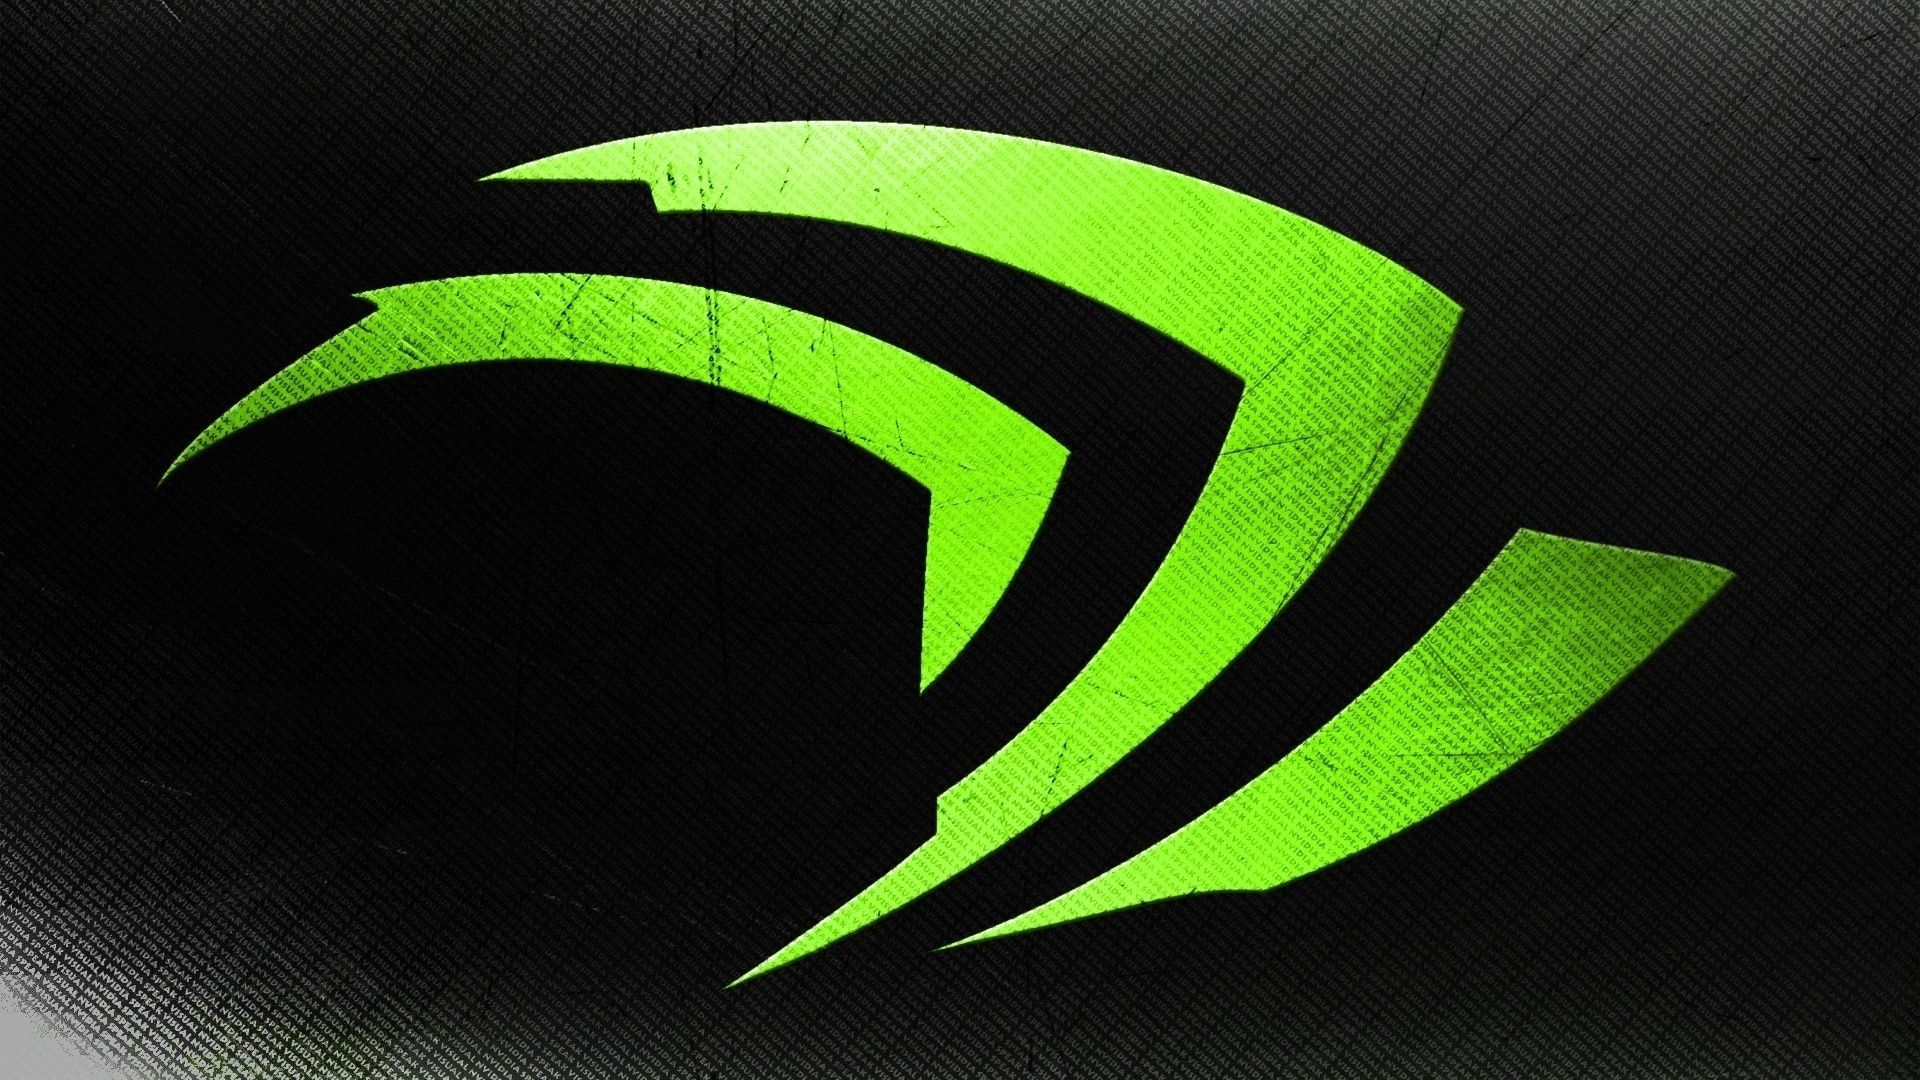 Gallery for - nvidia wallpaper download